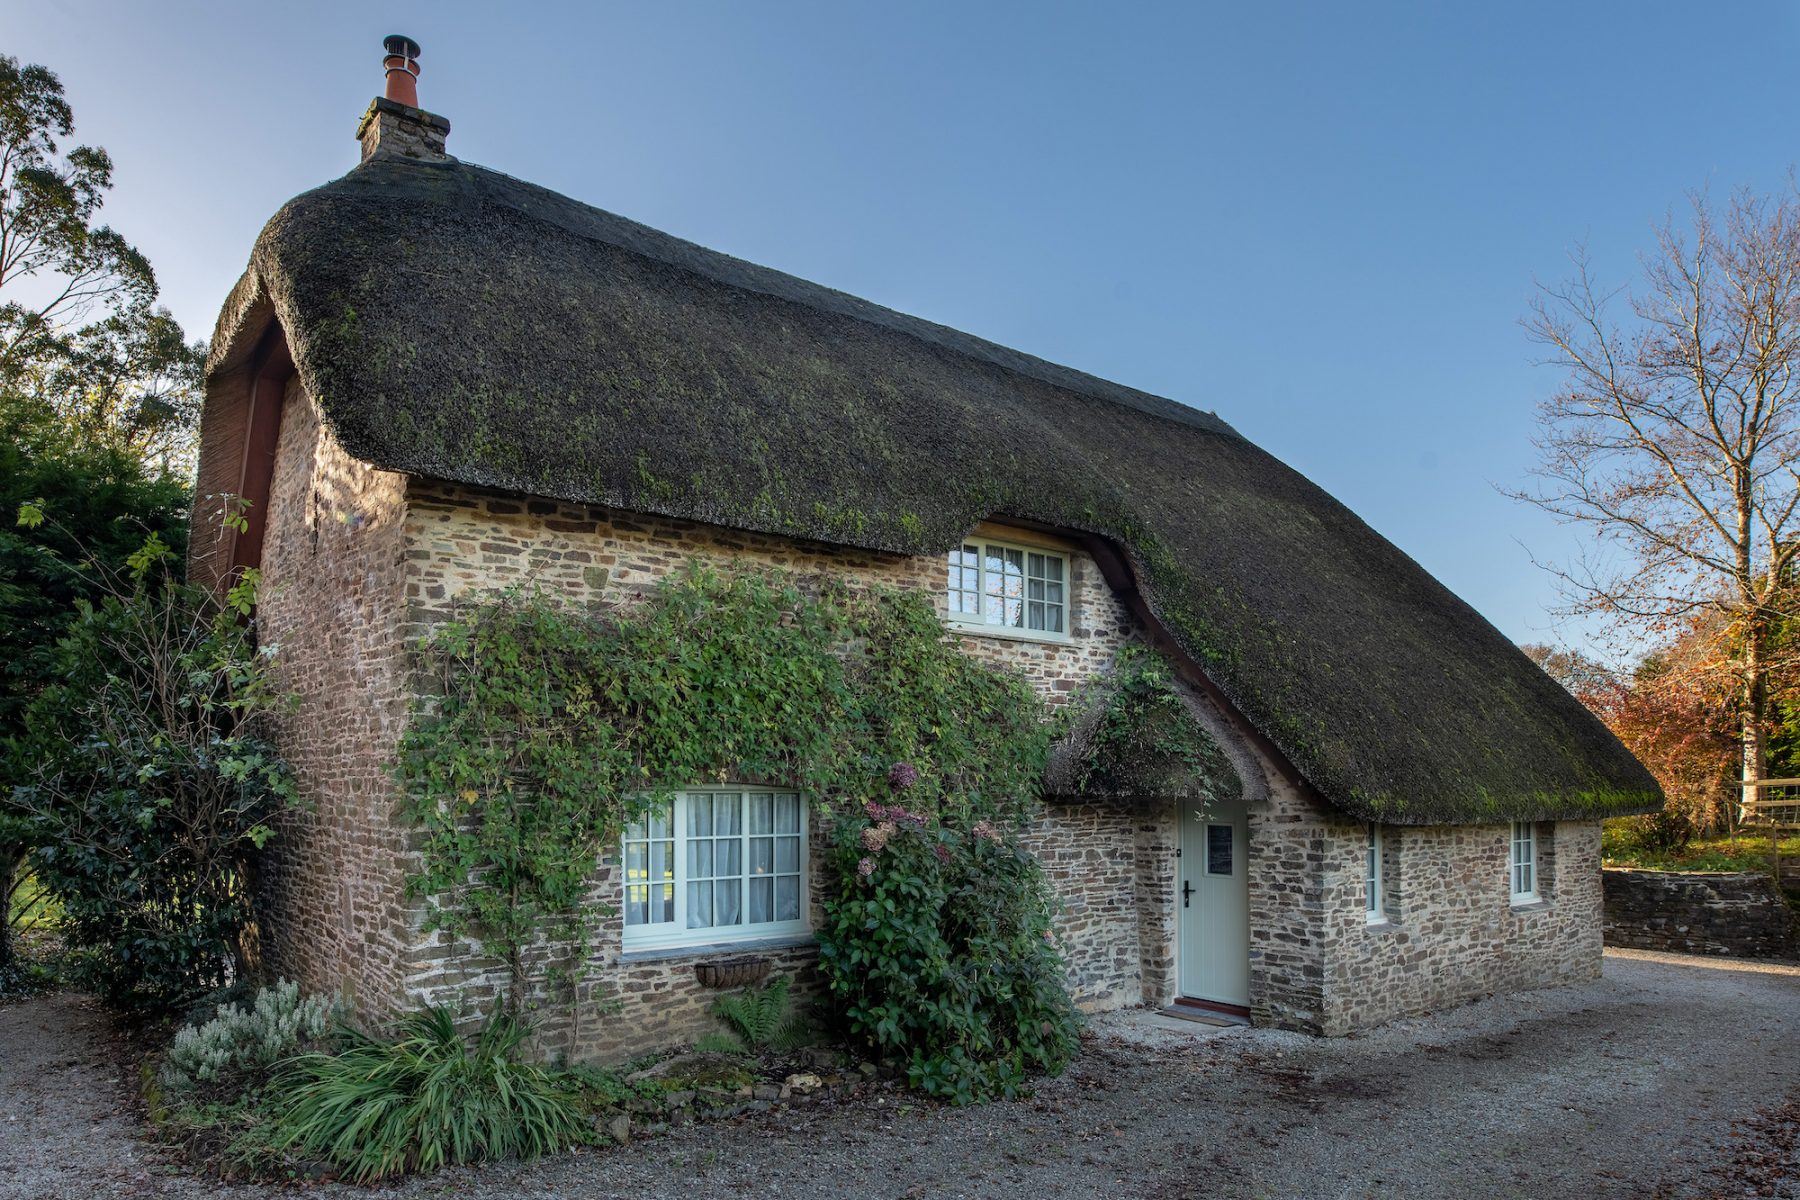 National Park timber windows full view thatched cottage